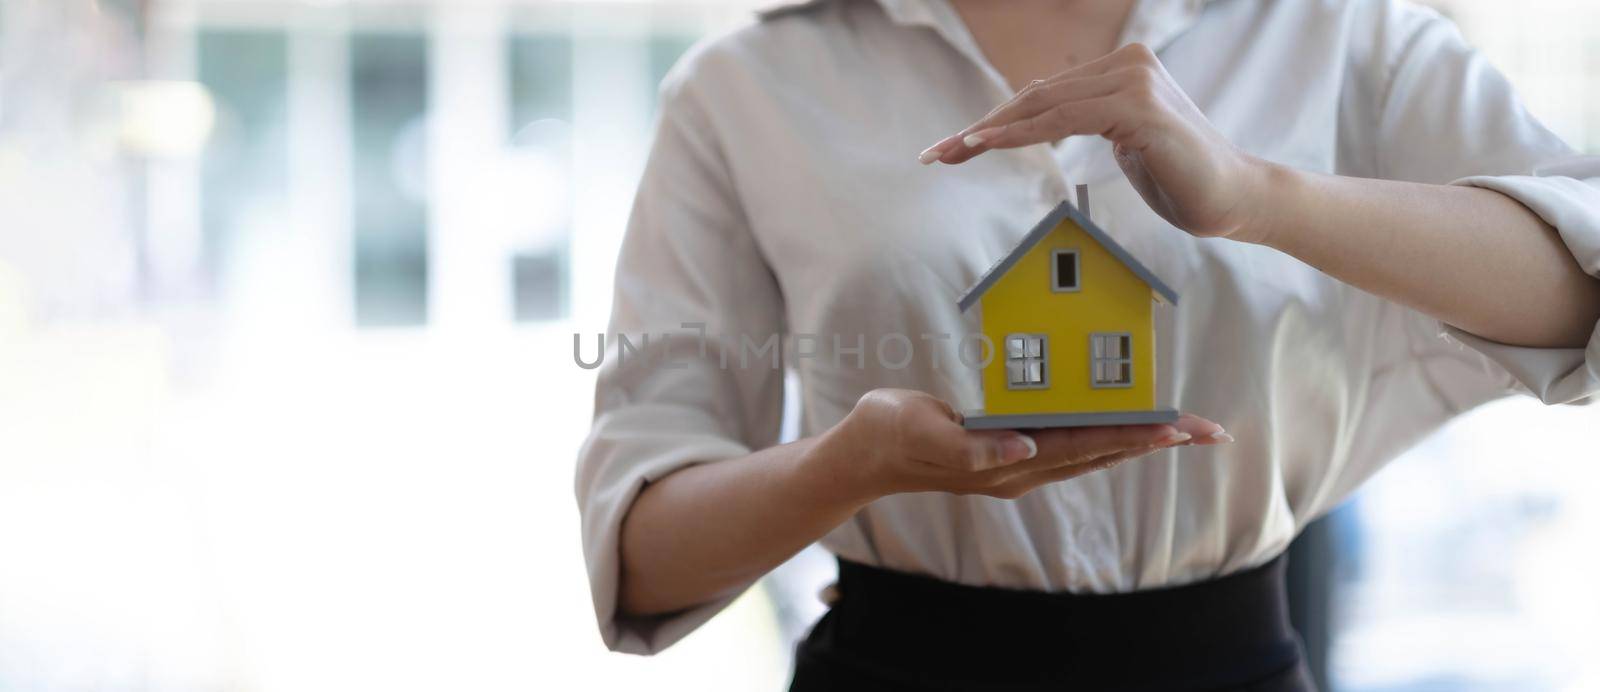 real estate agent use their hands to protect the red roofs, the concept of protecting houses using the gestures and symbols of real estate investors, taking care of credit and contracts..